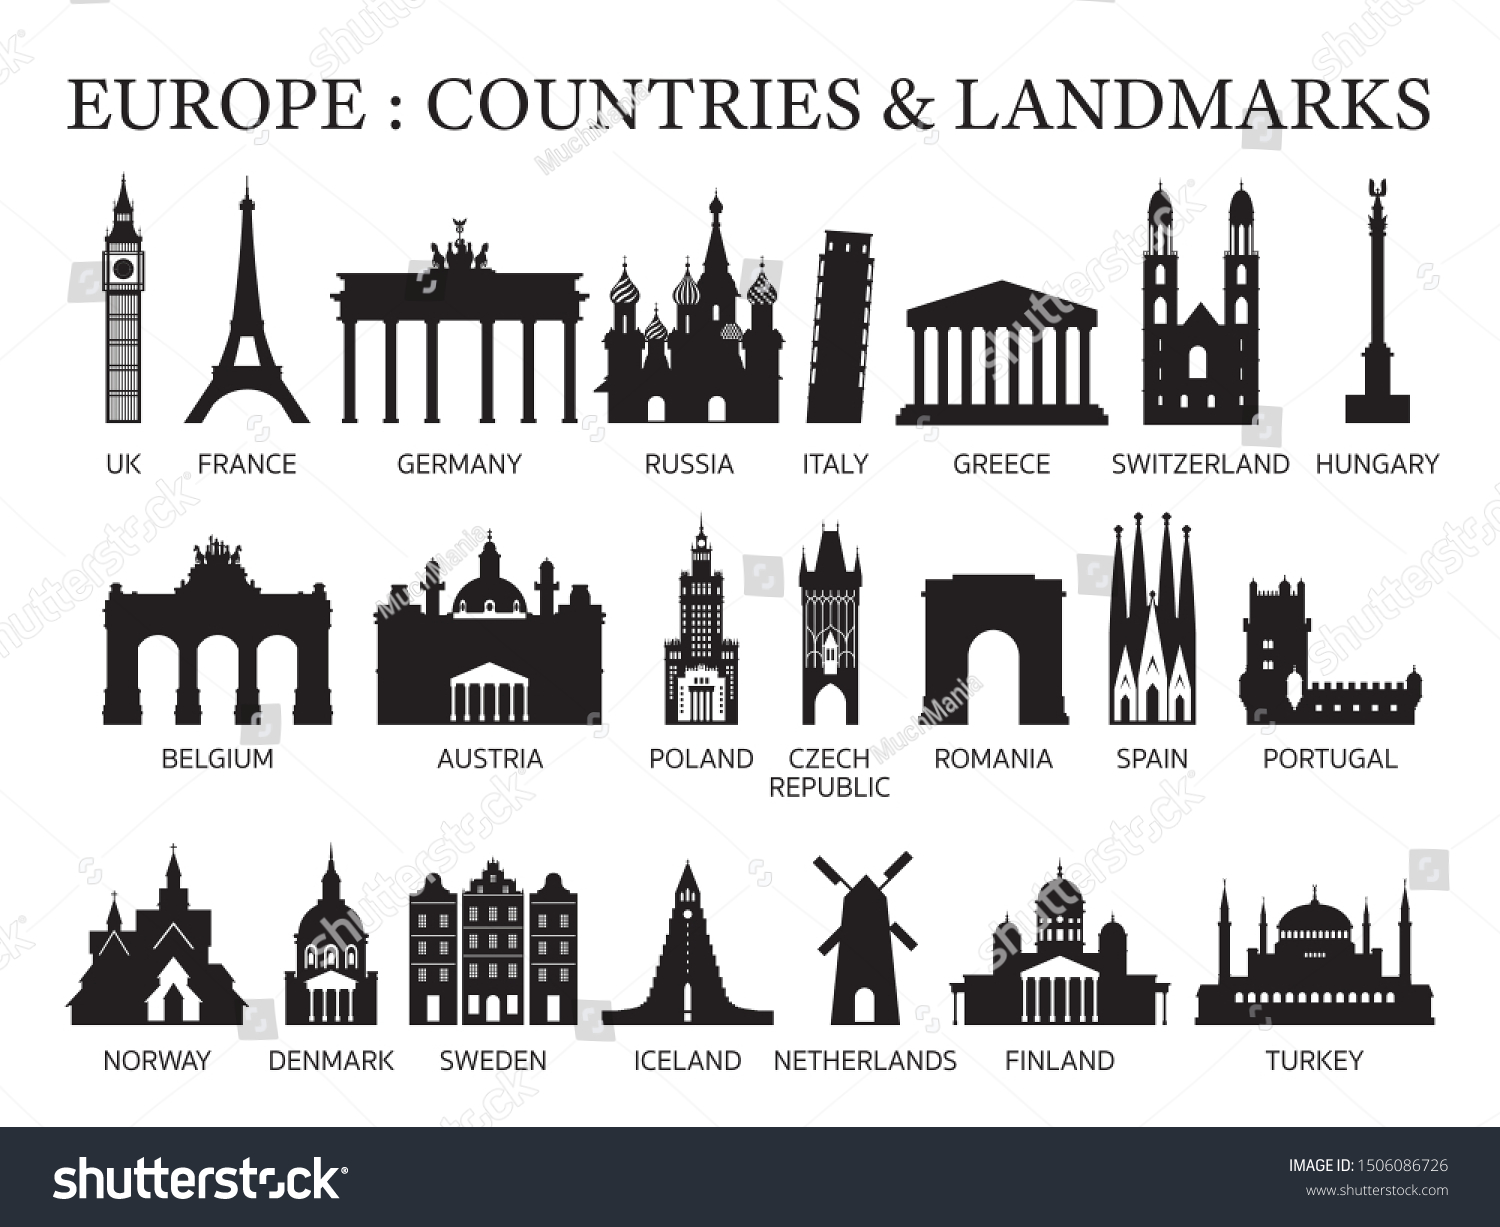 Europe Countries Landmarks Silhouette, Famous Place and Historical Buildings, Travel and Tourist Attraction #1506086726